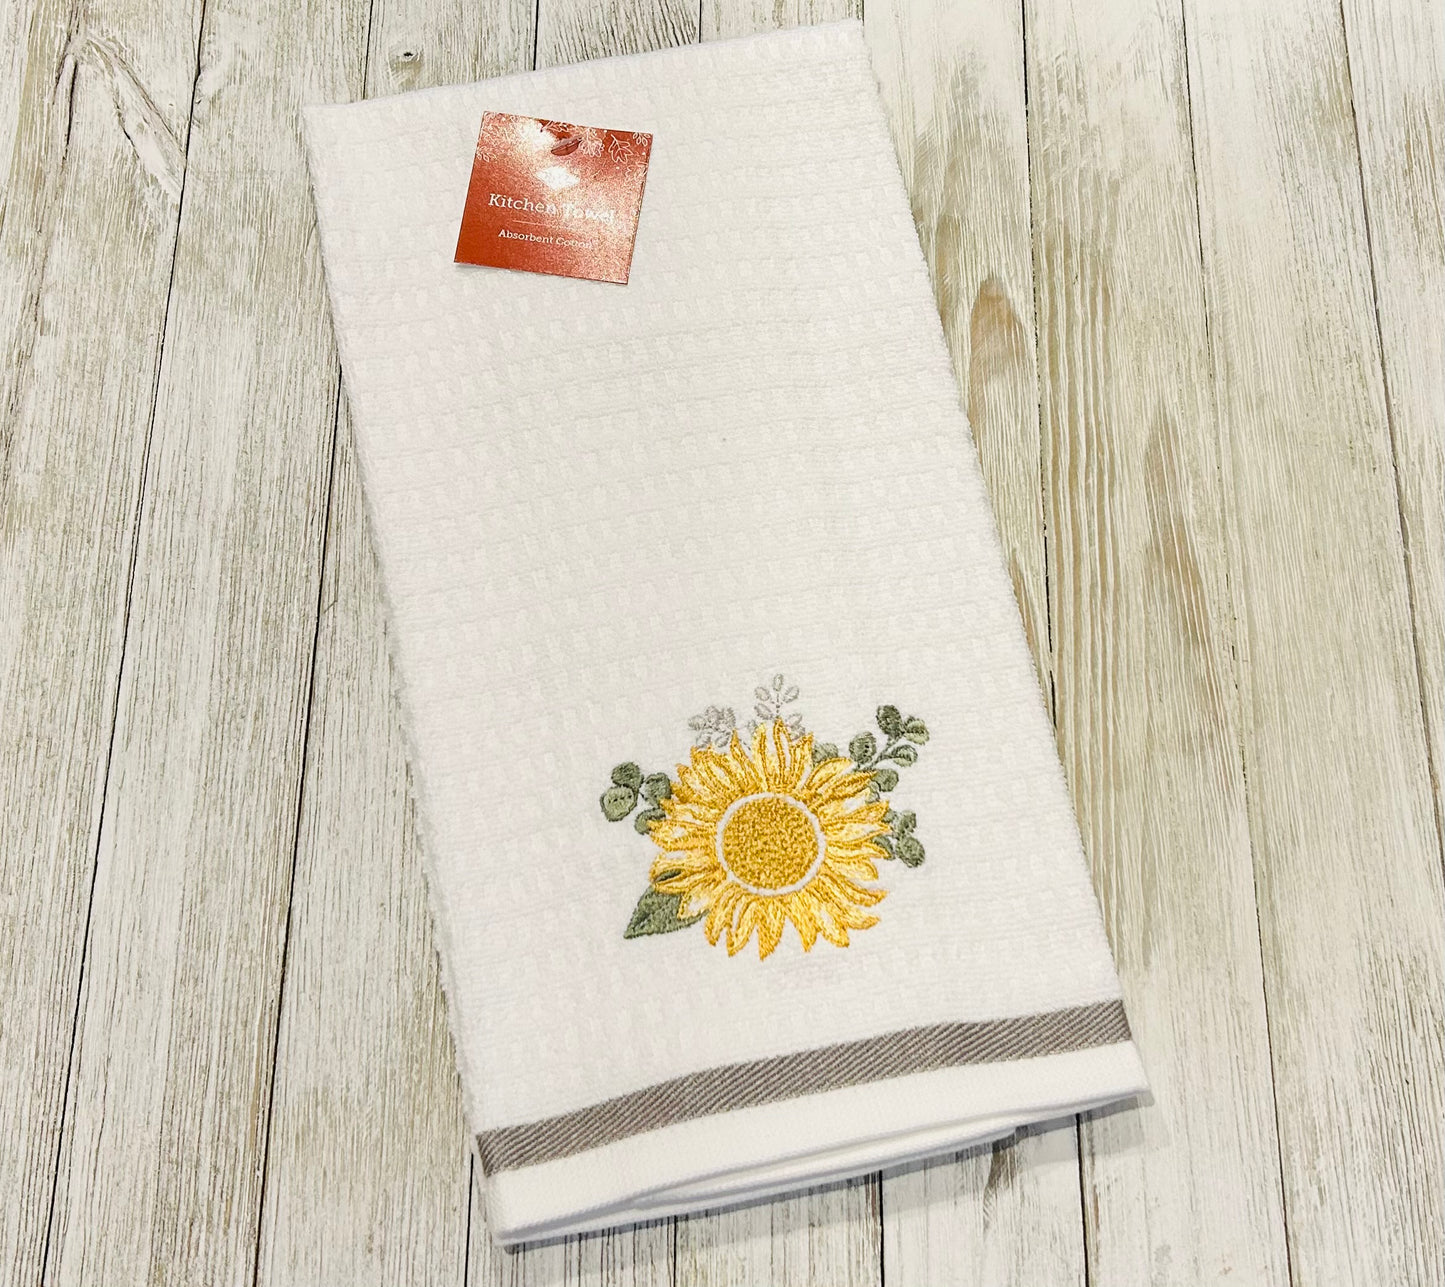 Dish Towel - Flower Themed - Sunflower Embroidered